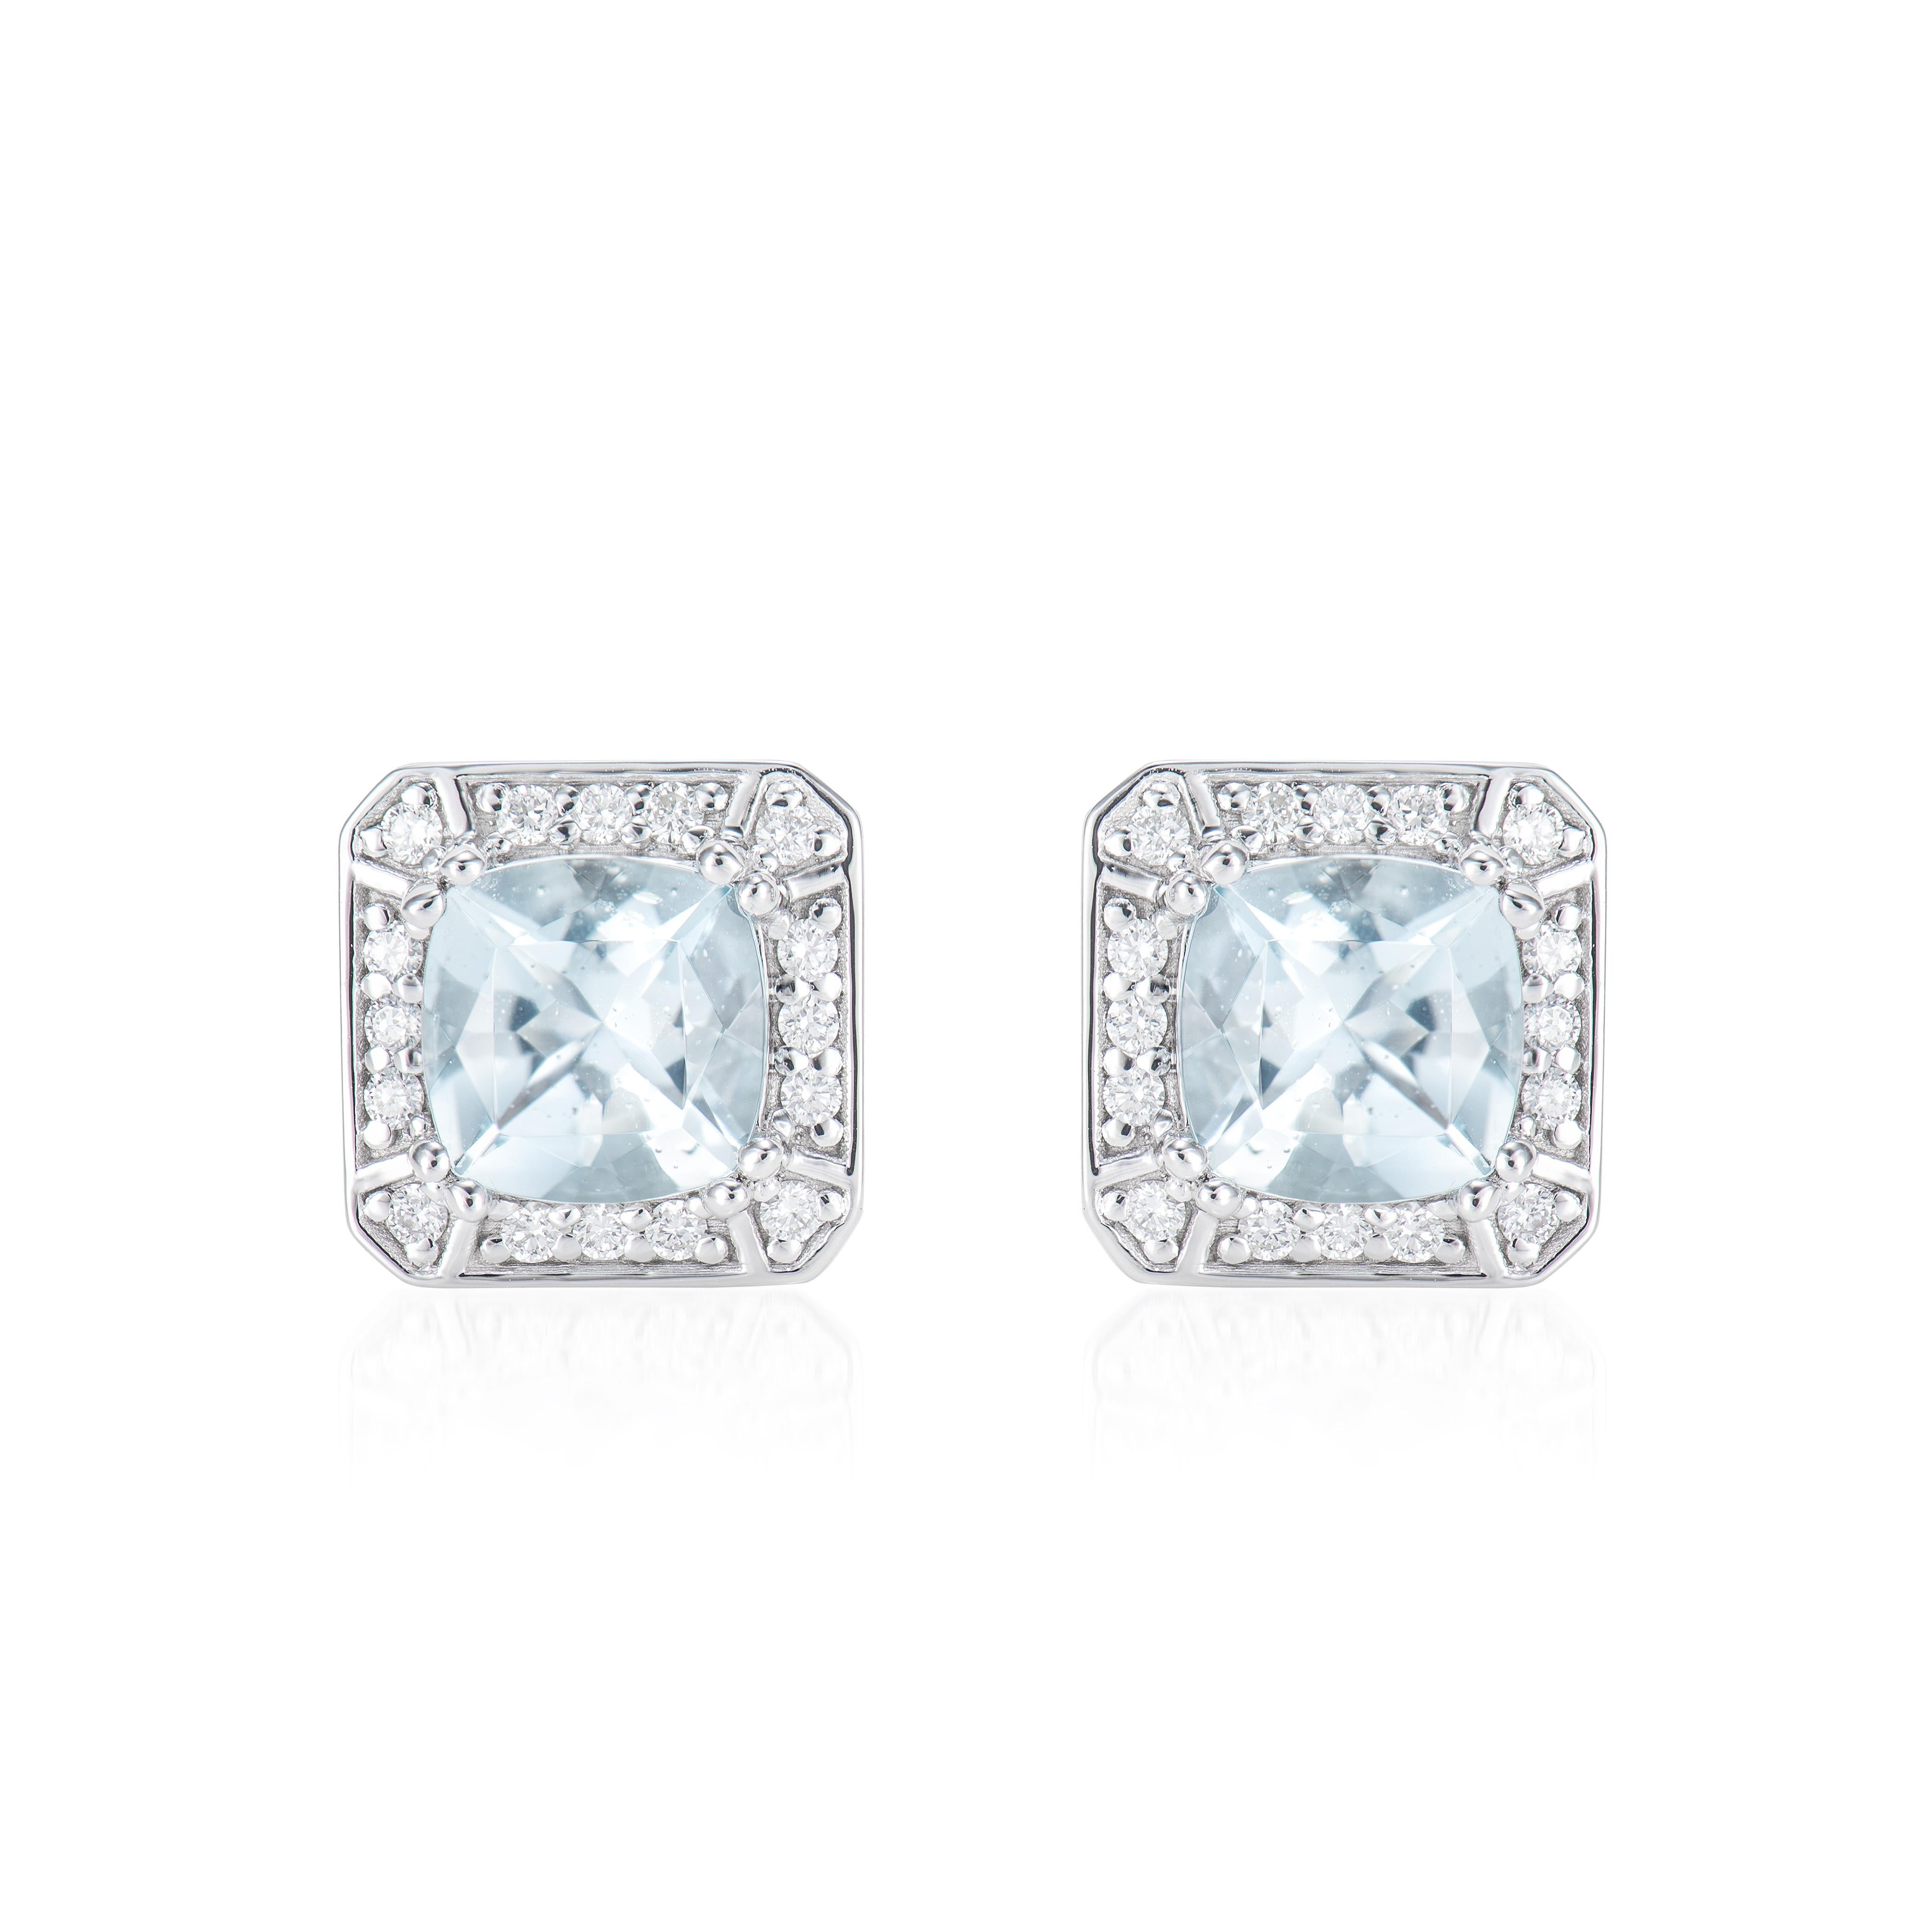 Contemporary 2.41 Carat Aquamarine Stud Earrings in 18 Karat White Gold with White Diamond For Sale